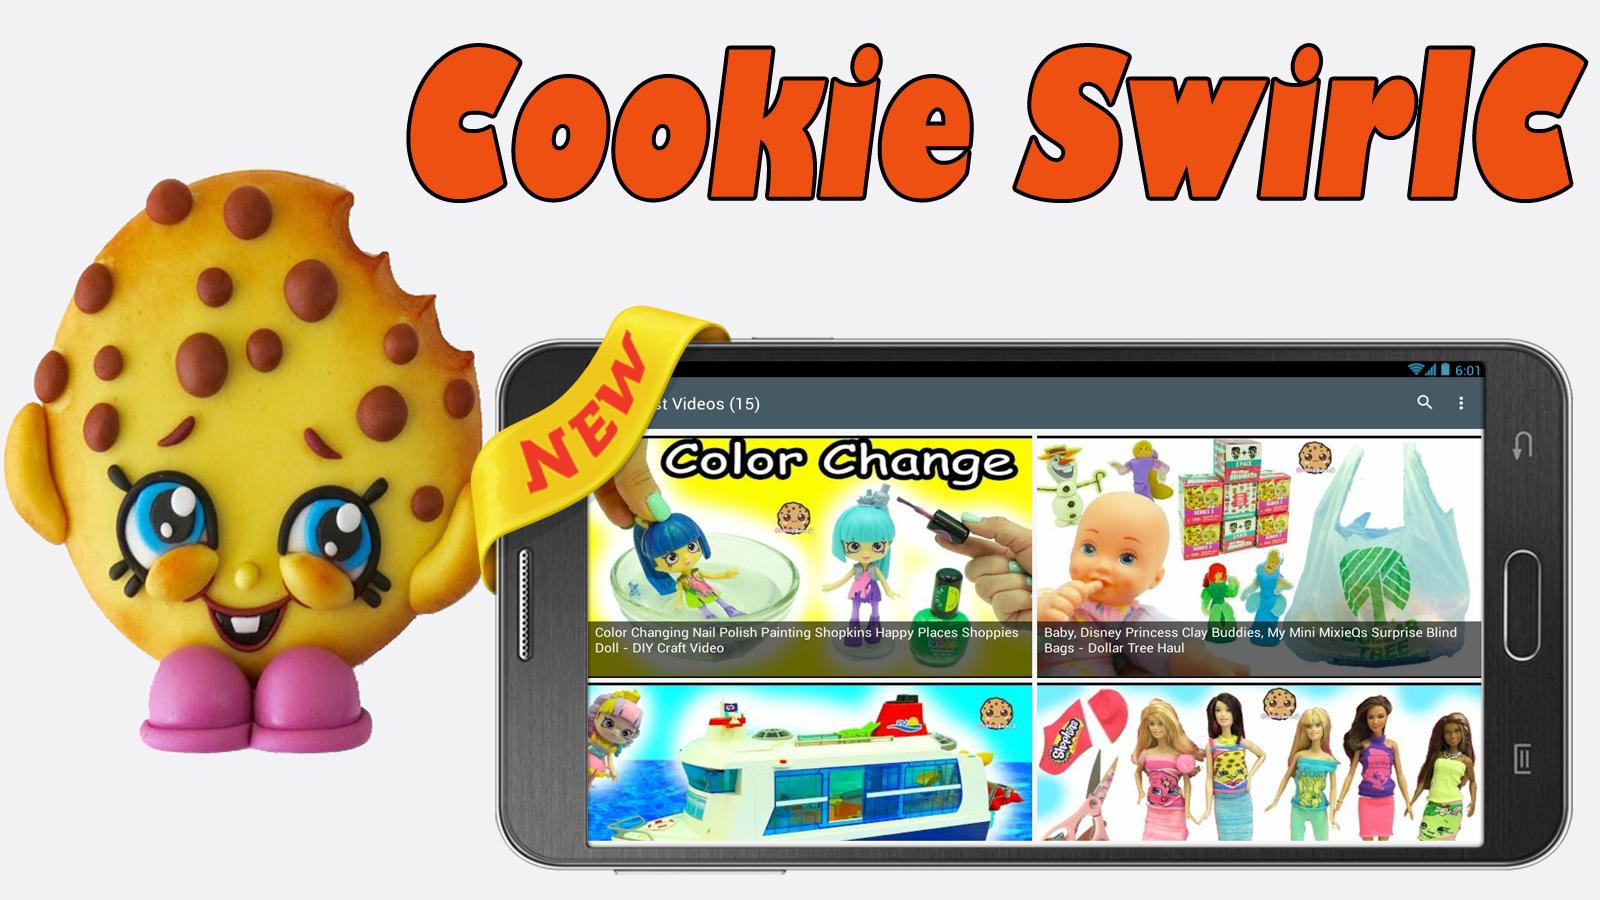 Cookieswirlc Fans For Android Apk Download - just been playing roblox lps amino